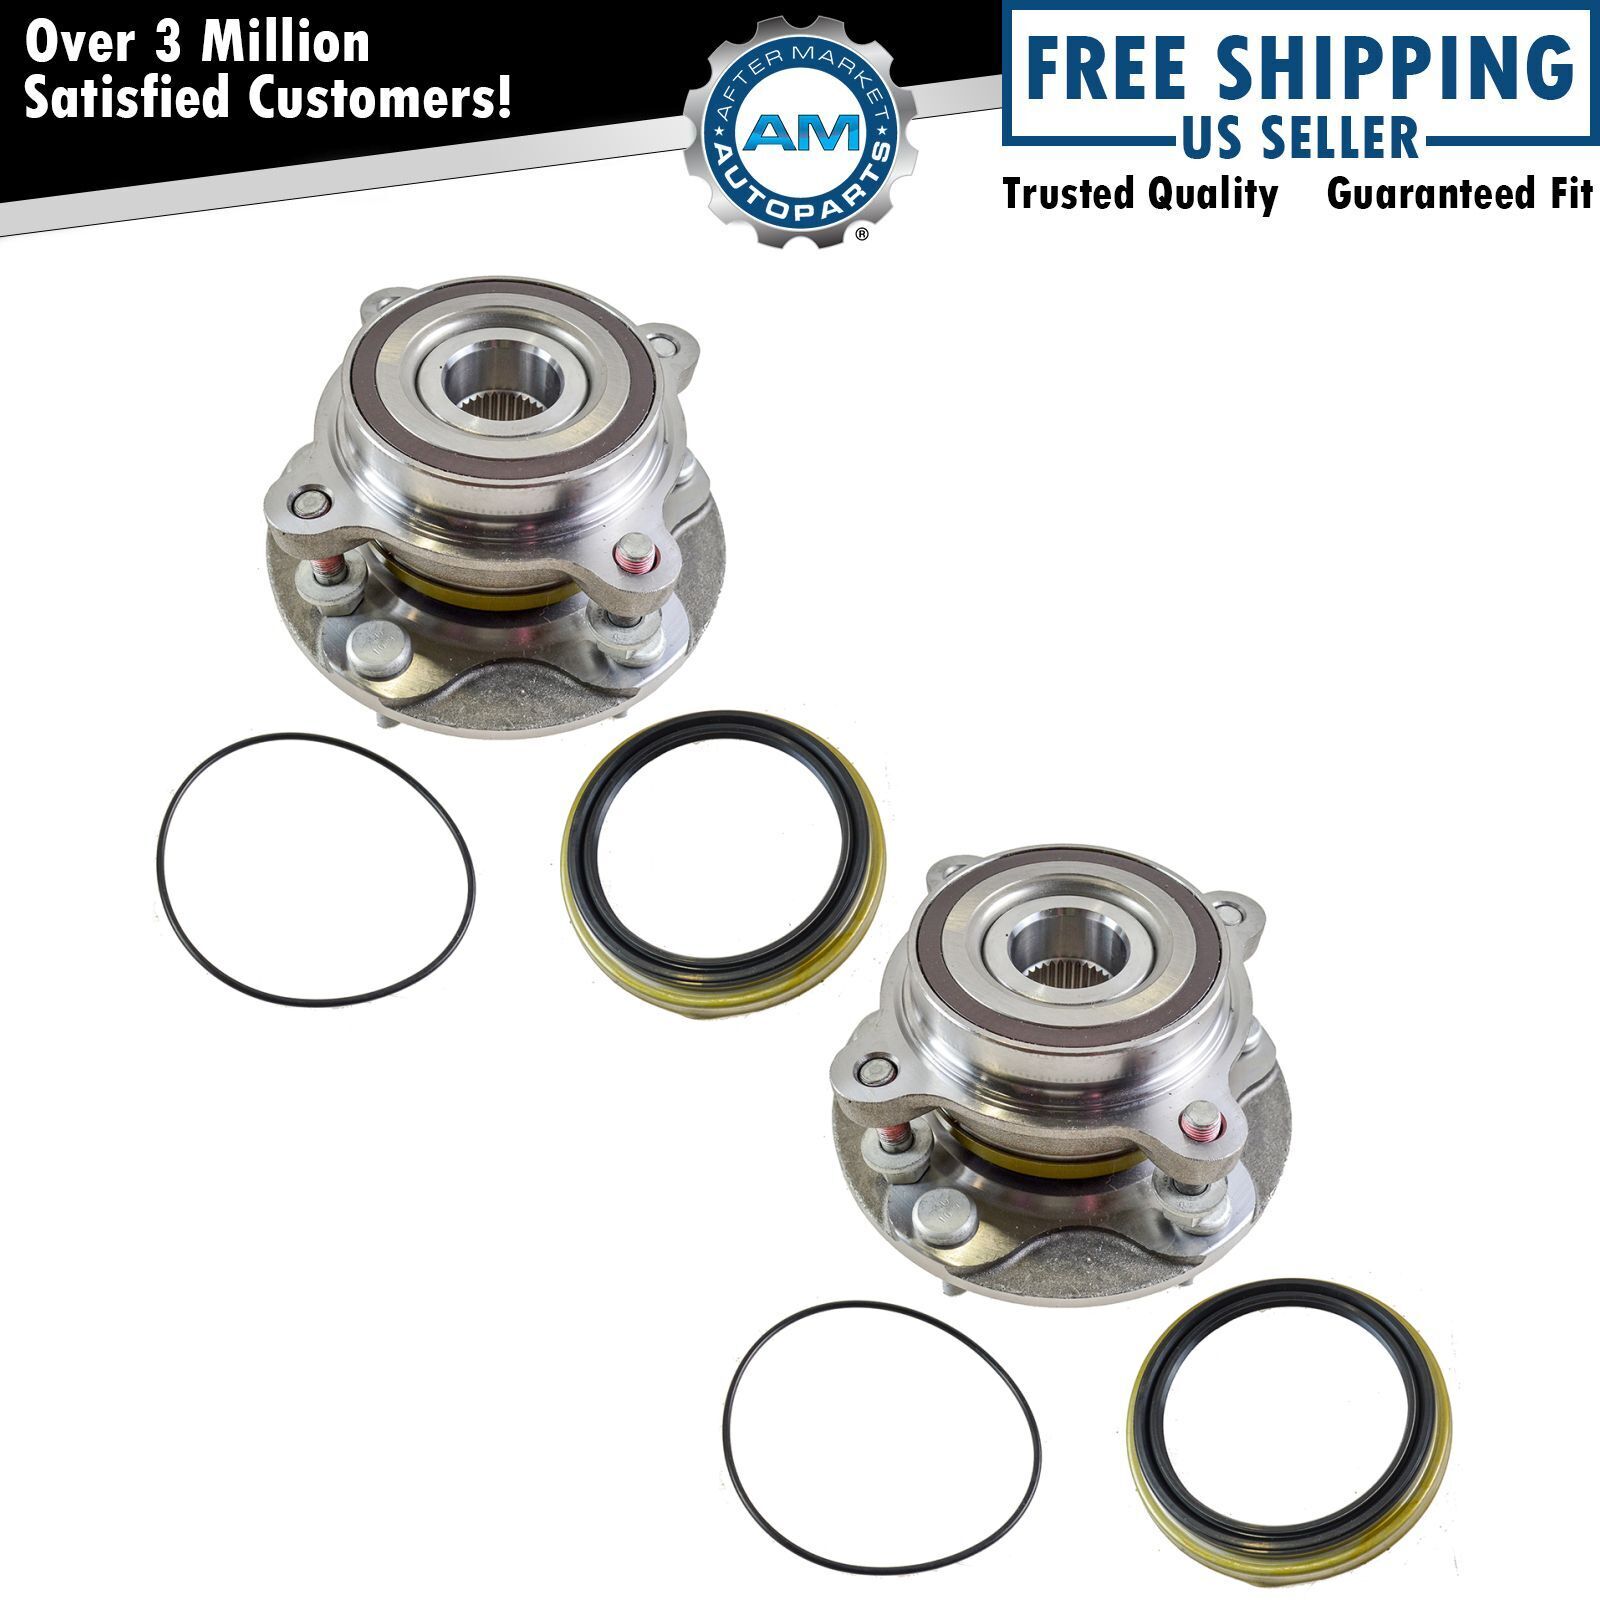 Front Wheel Bearing & Hub Assembly Pair for Toyota Pickup Truck SUV